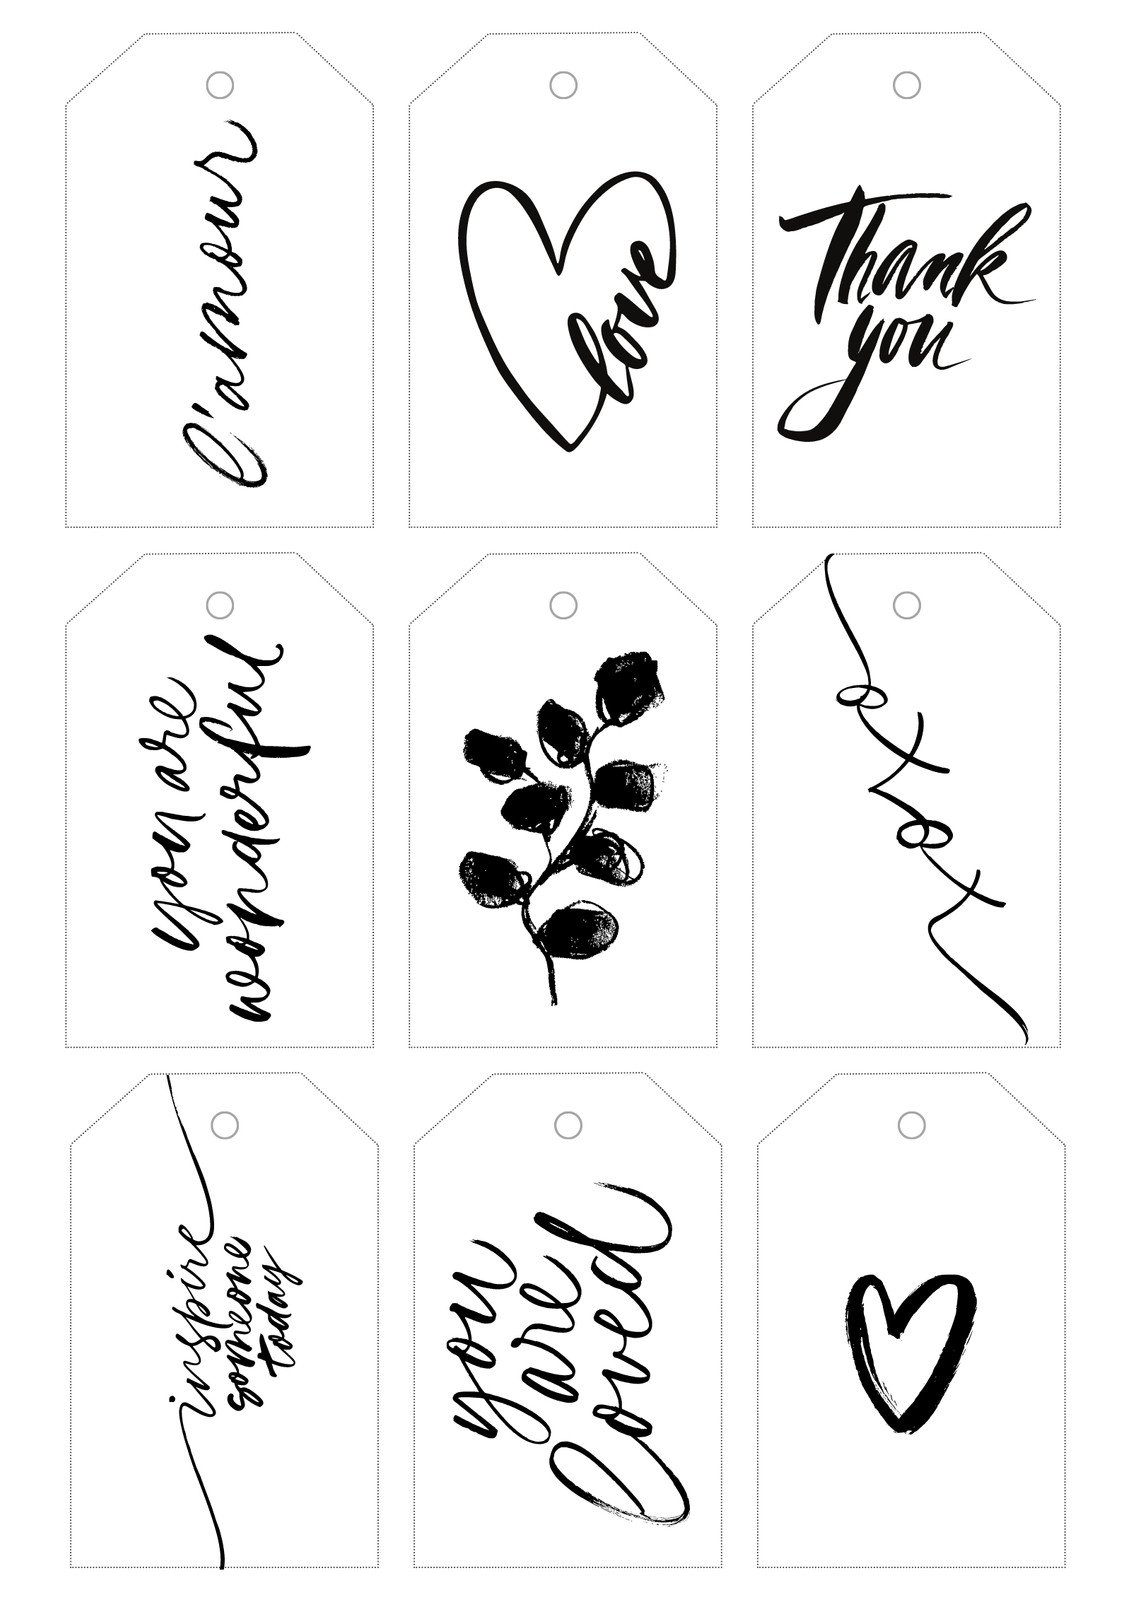 Best Wishes Sticker tag Suitable for Gift Wrapping and Cover Notes Name  Slip -Set of 150 Piece